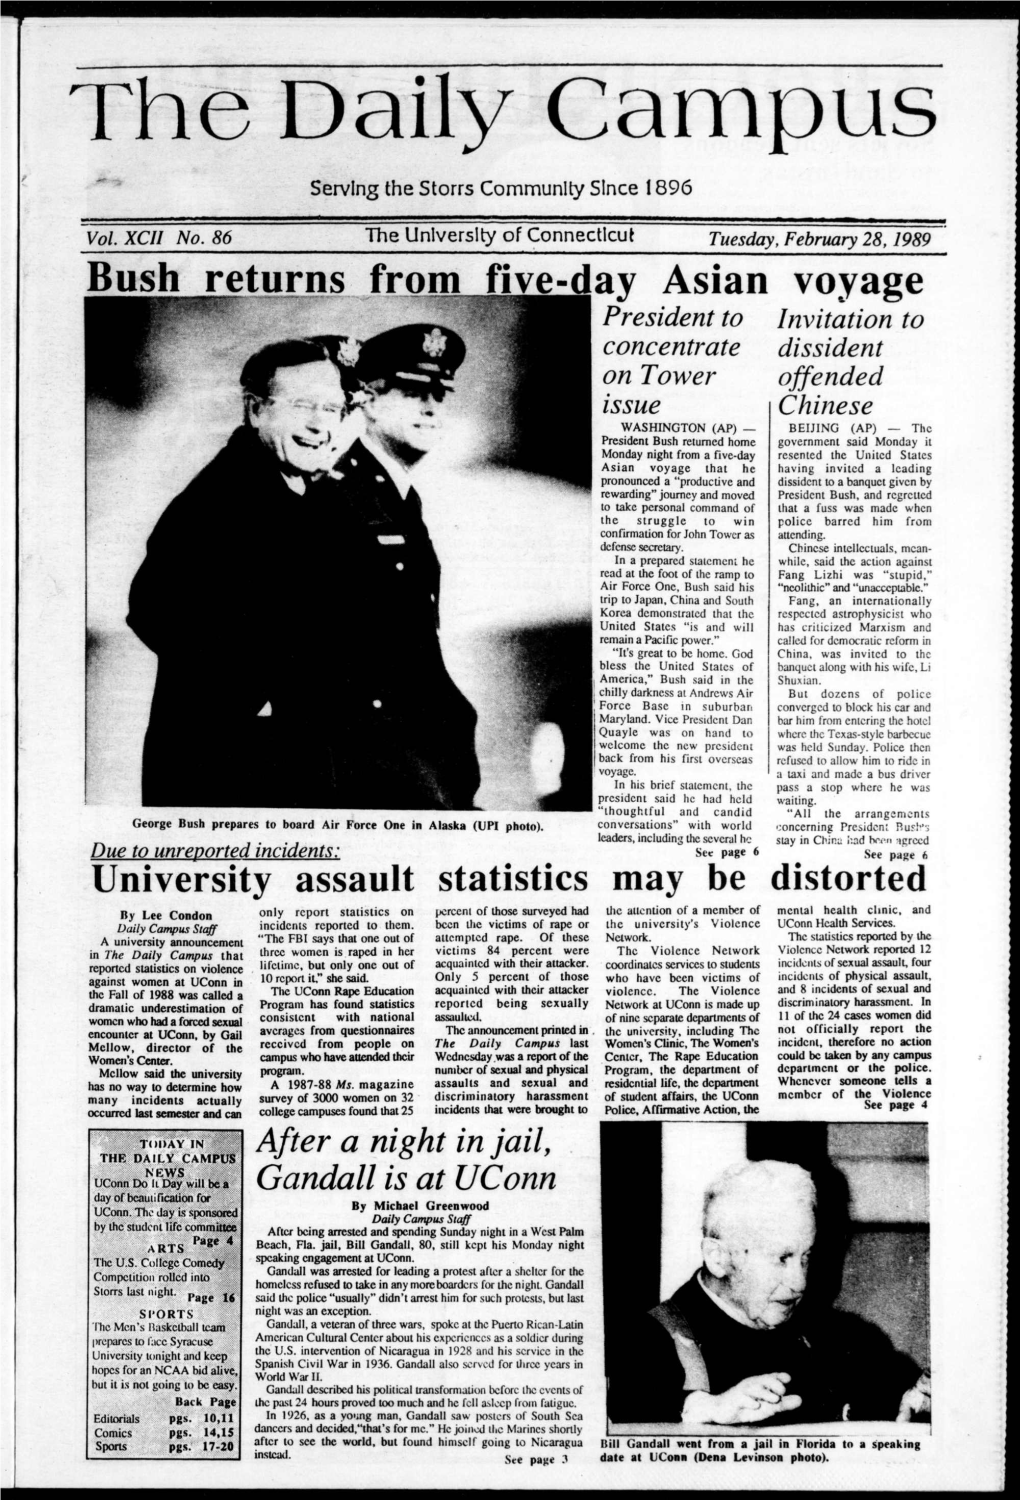 Bush Returns from Five-Day Asian Voyage University Assault Statistics May Be Distorted